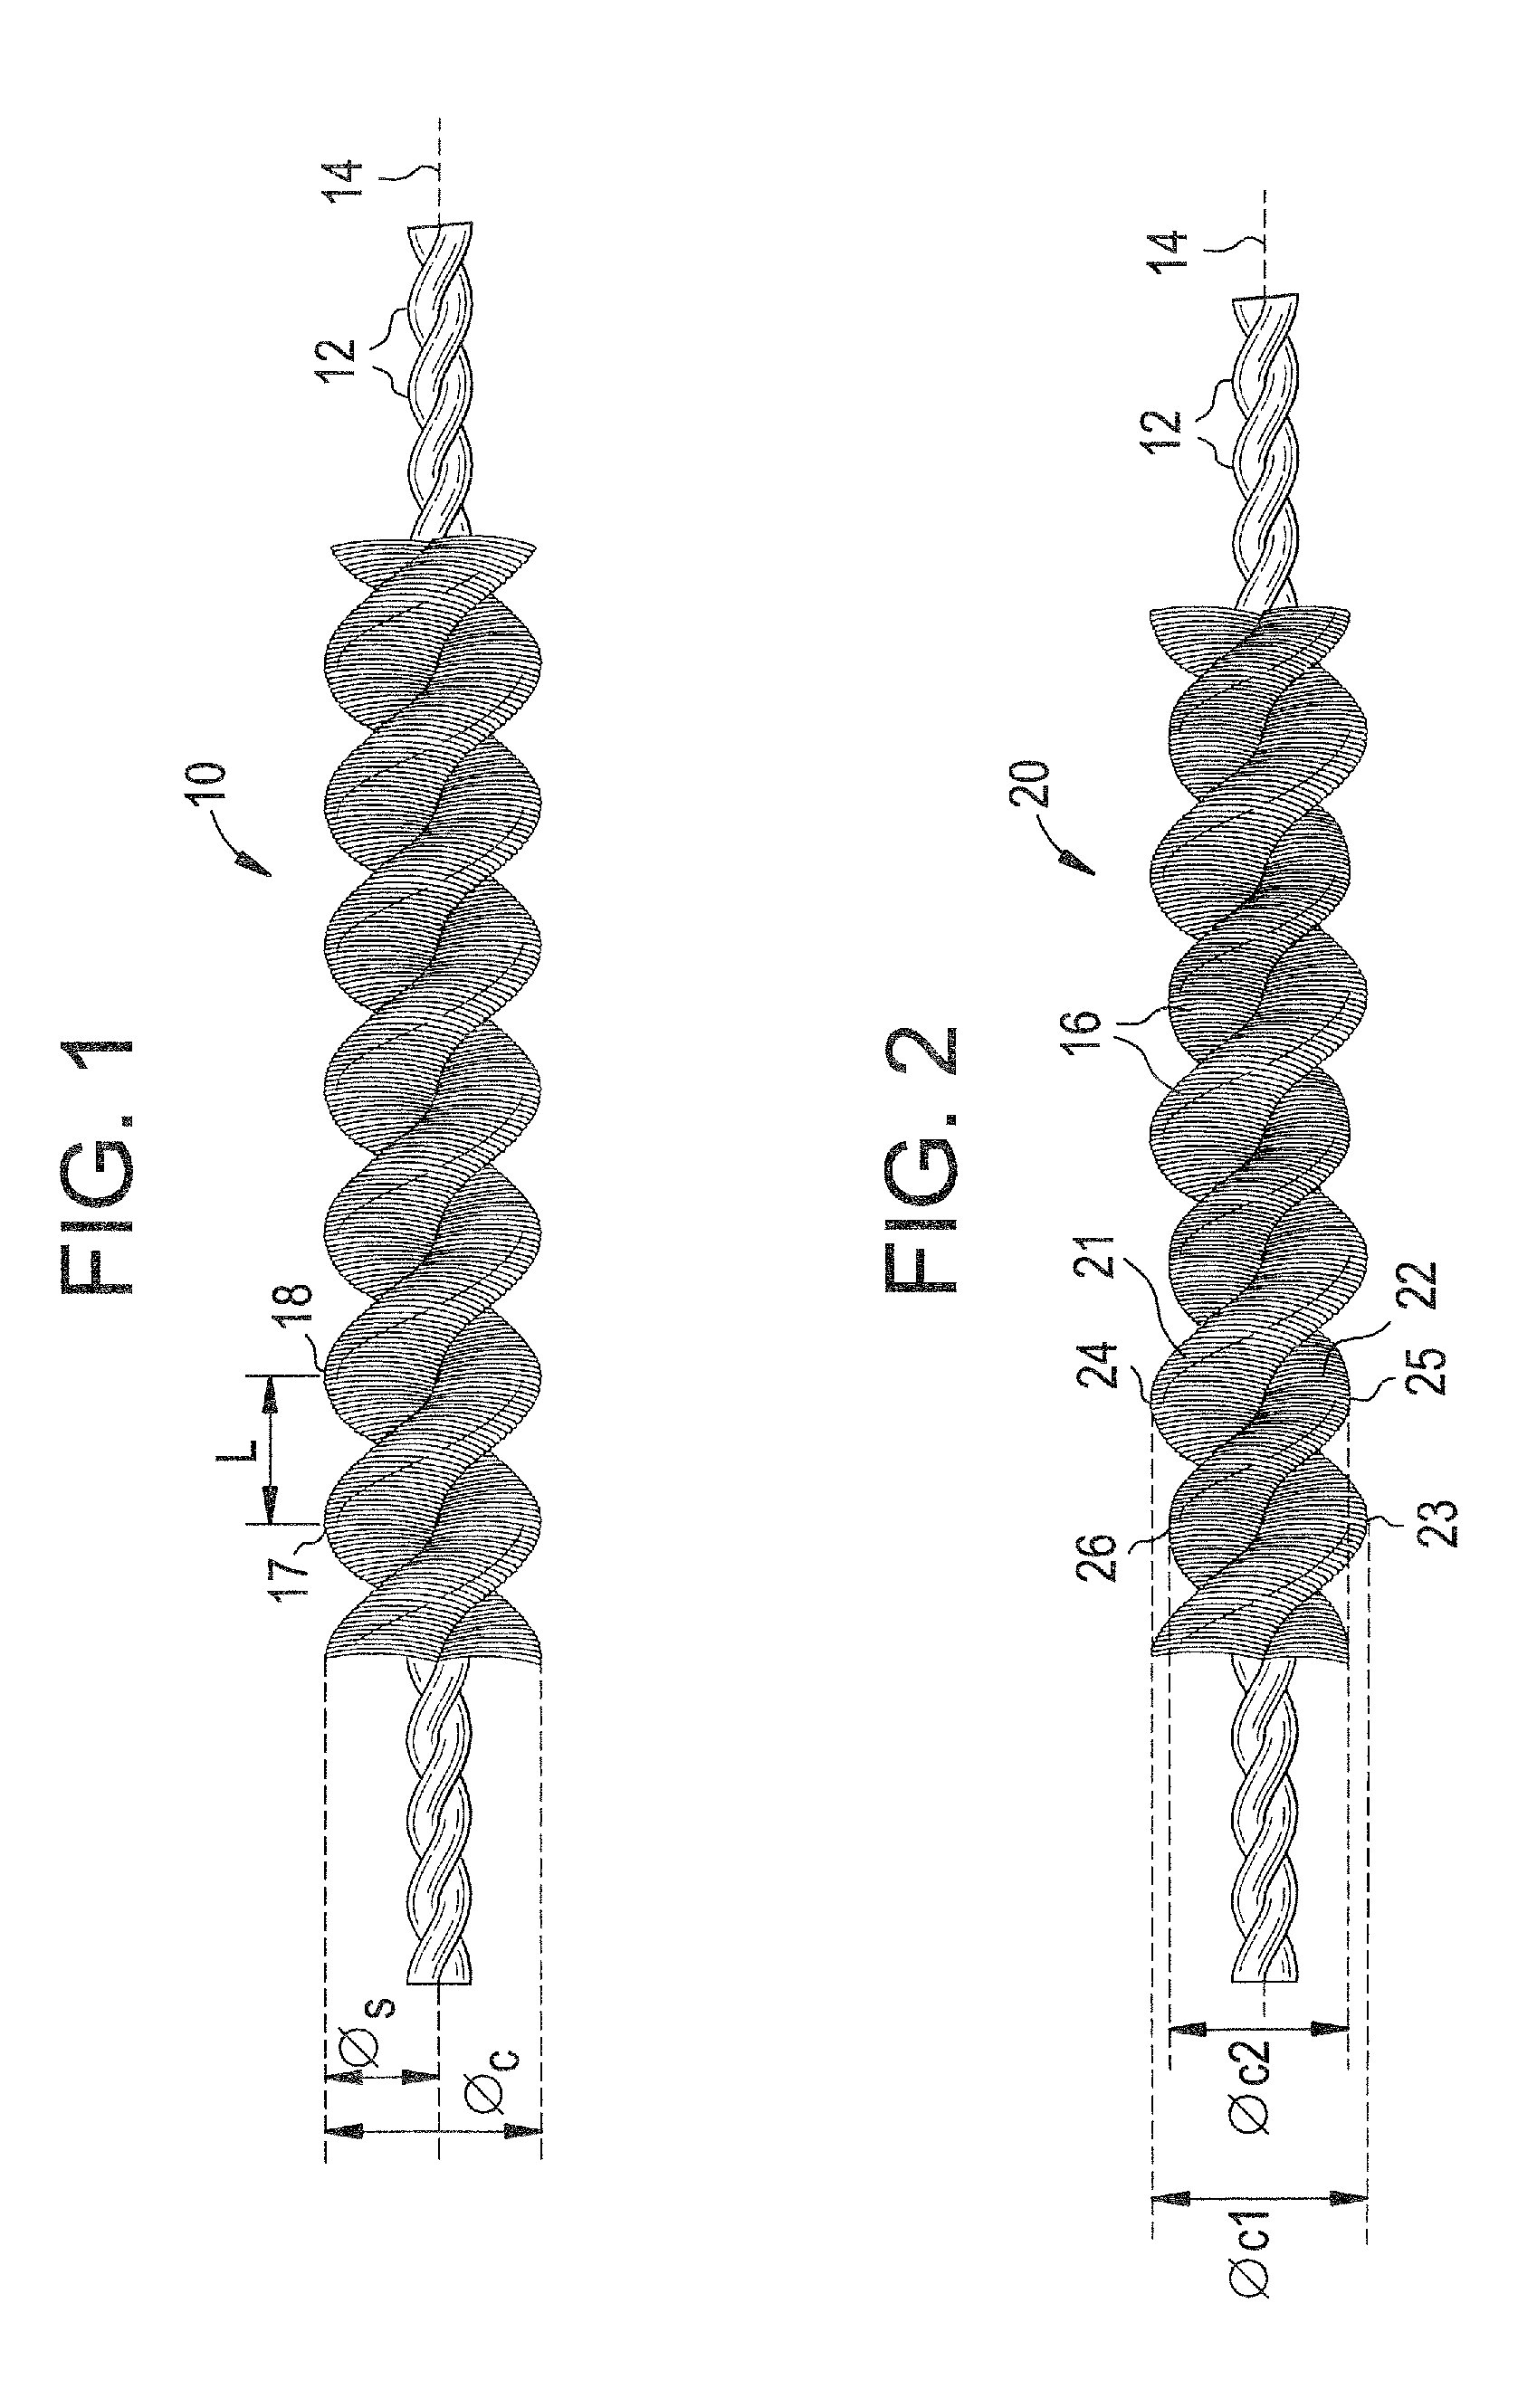 Twisted wire brush and method of making